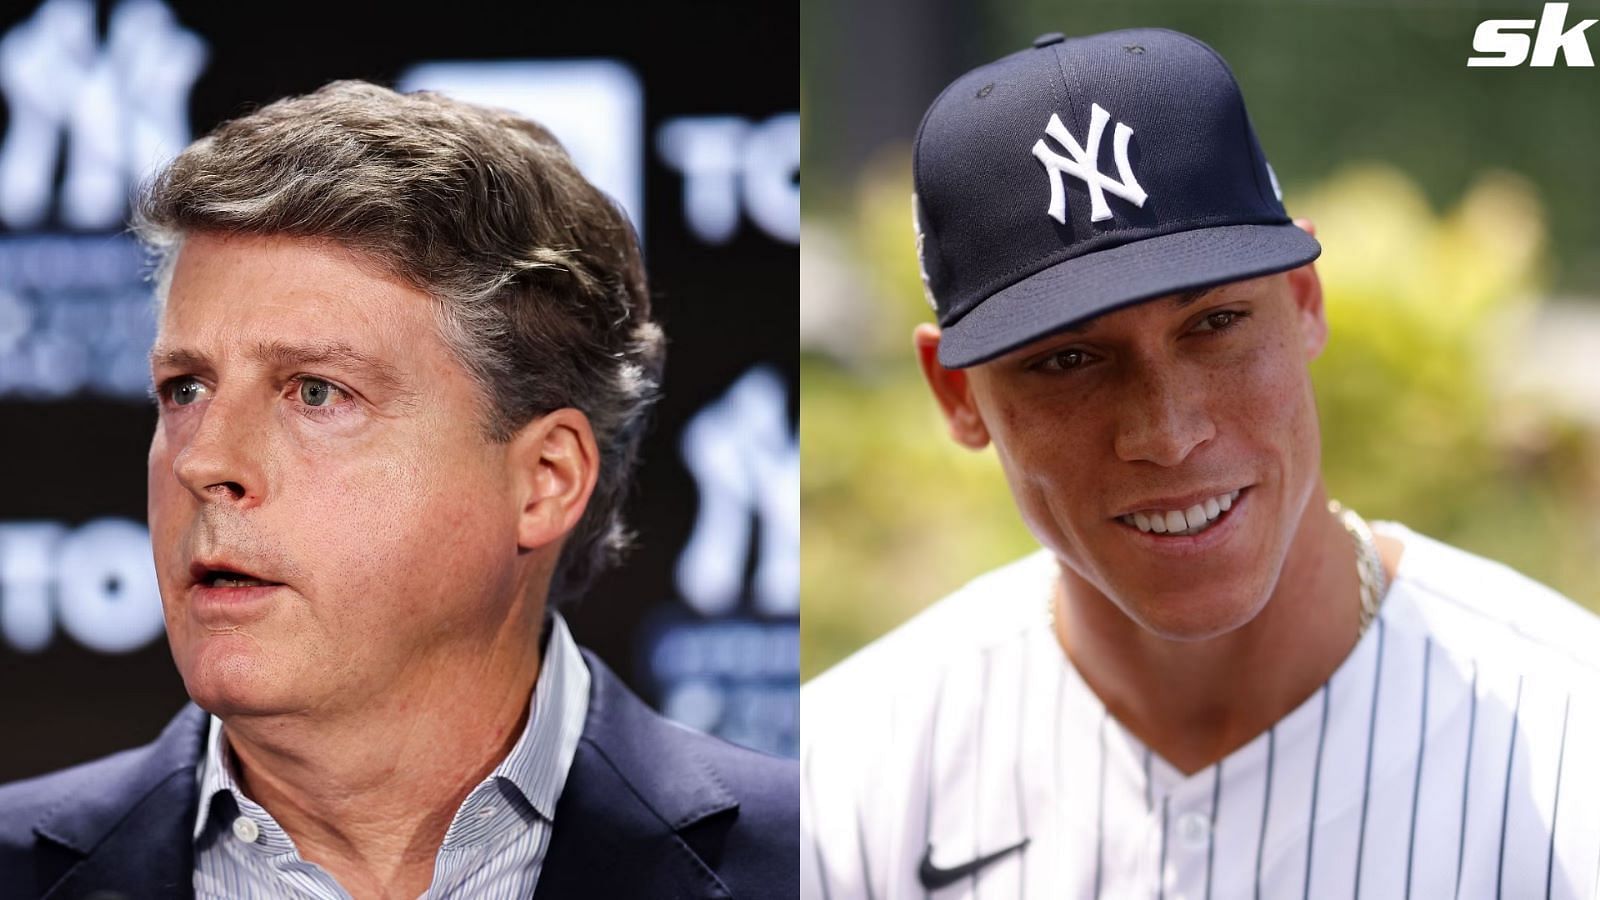 New York Yankees owner Hal Steinbrenner unsure when Aaron Judge will recover from sprained toe